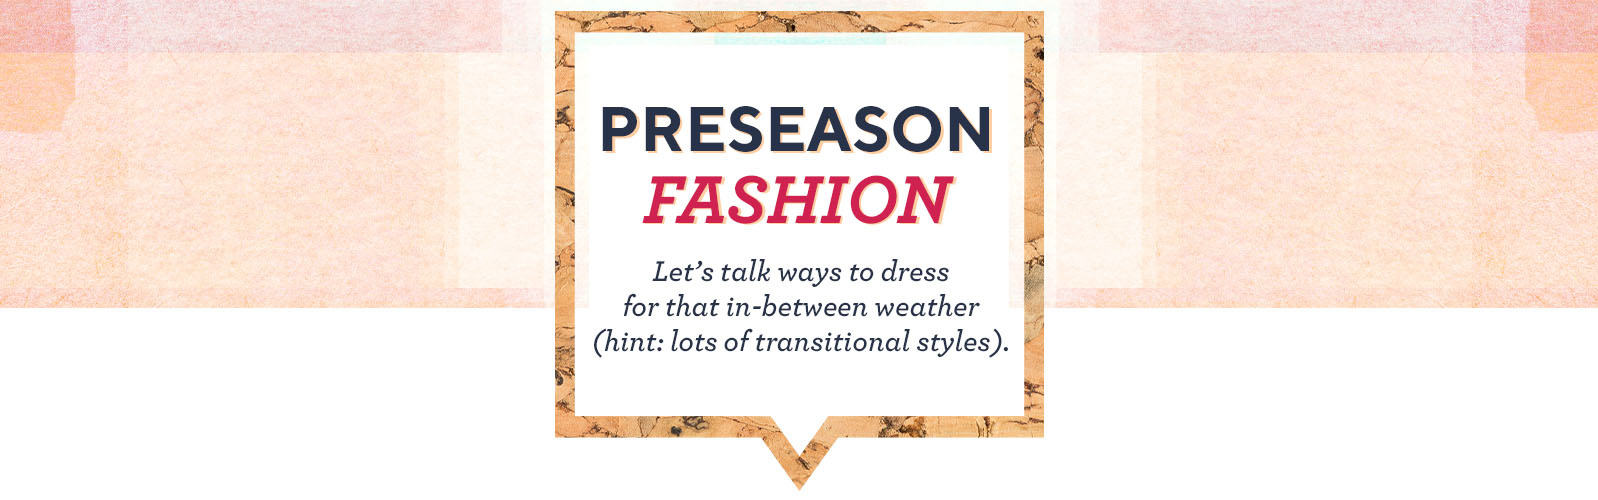 Preseason Fashion.  Let's talk ways to dress for that in-between weather (hint: lots of transitional styles). 